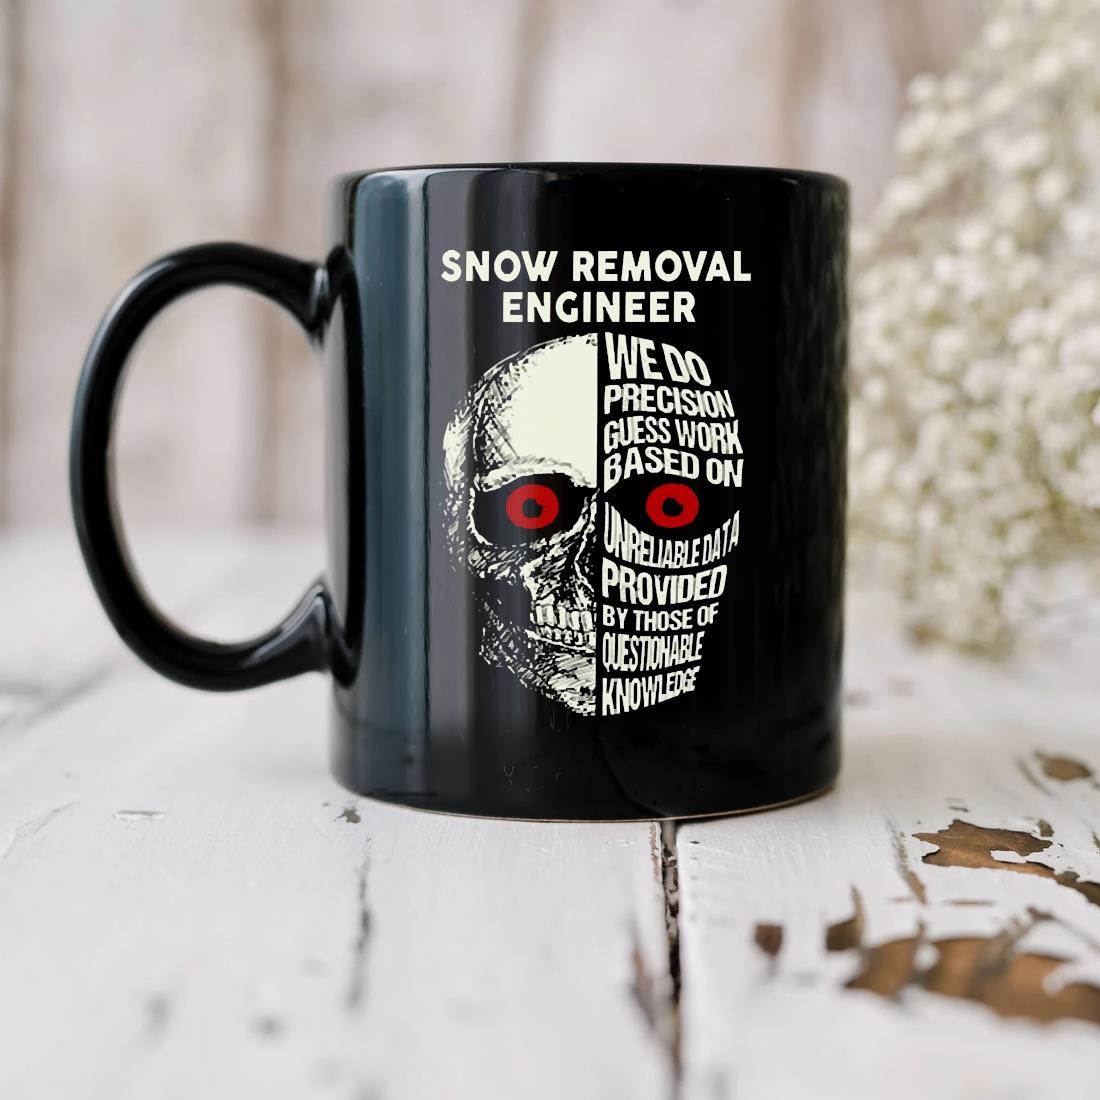 Snow Removal Engineer We Do Precision Guess Work Based On Unreliable Data Provided By Those Of Questionable Knowledge Skull Mug biu.jpg